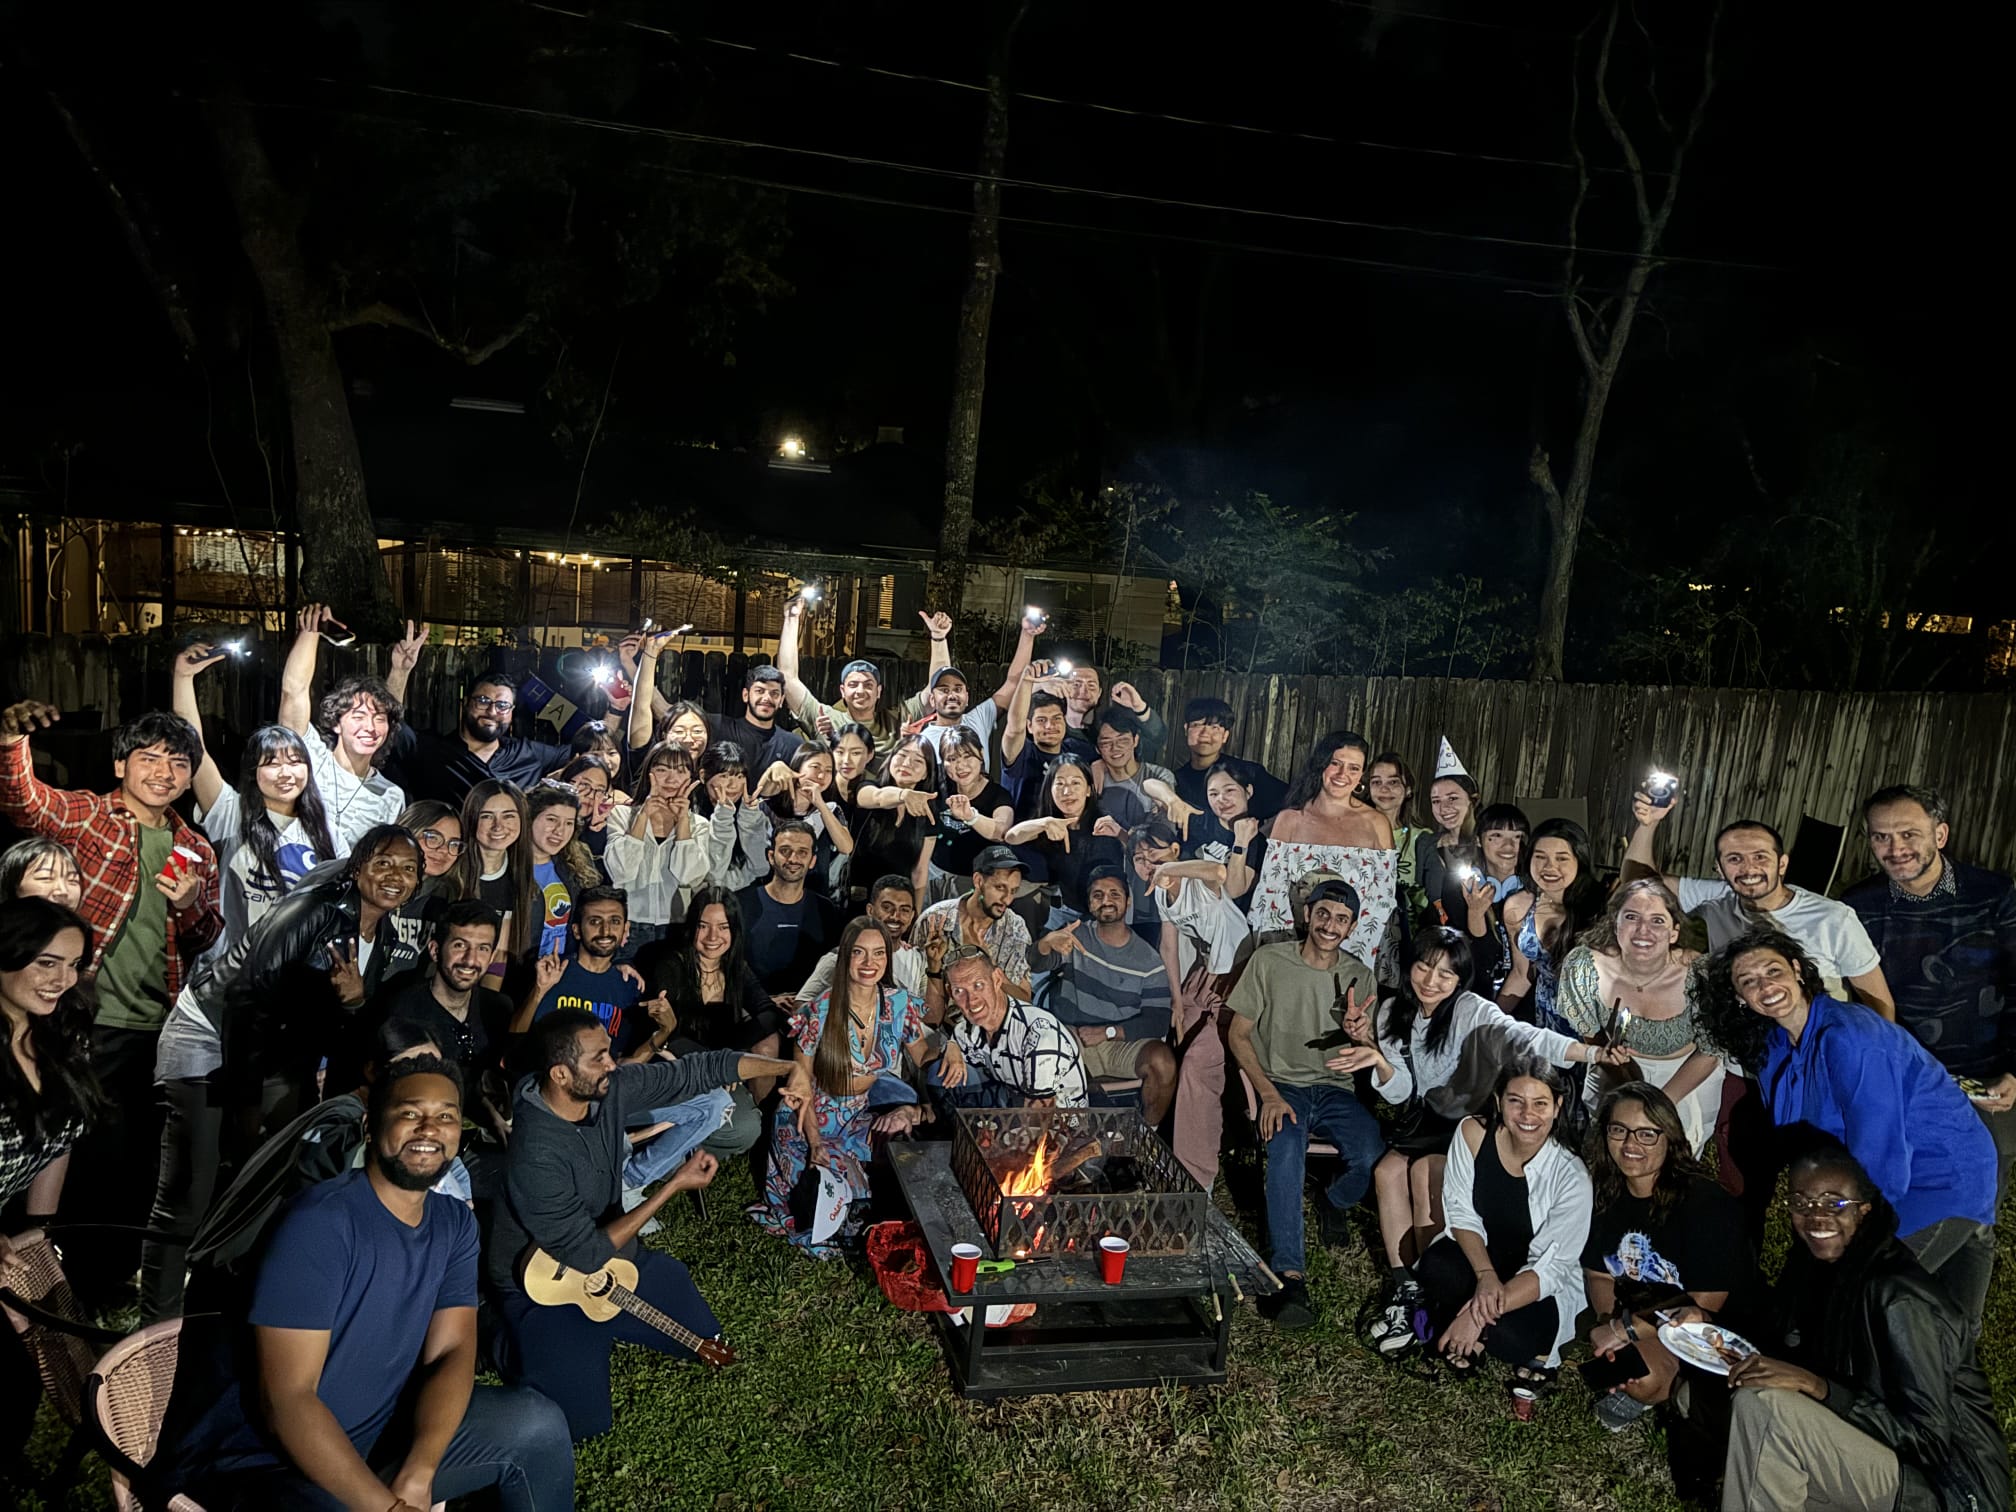 50+ international students outside around a fire celebrating 70 years of the English Language Institute.